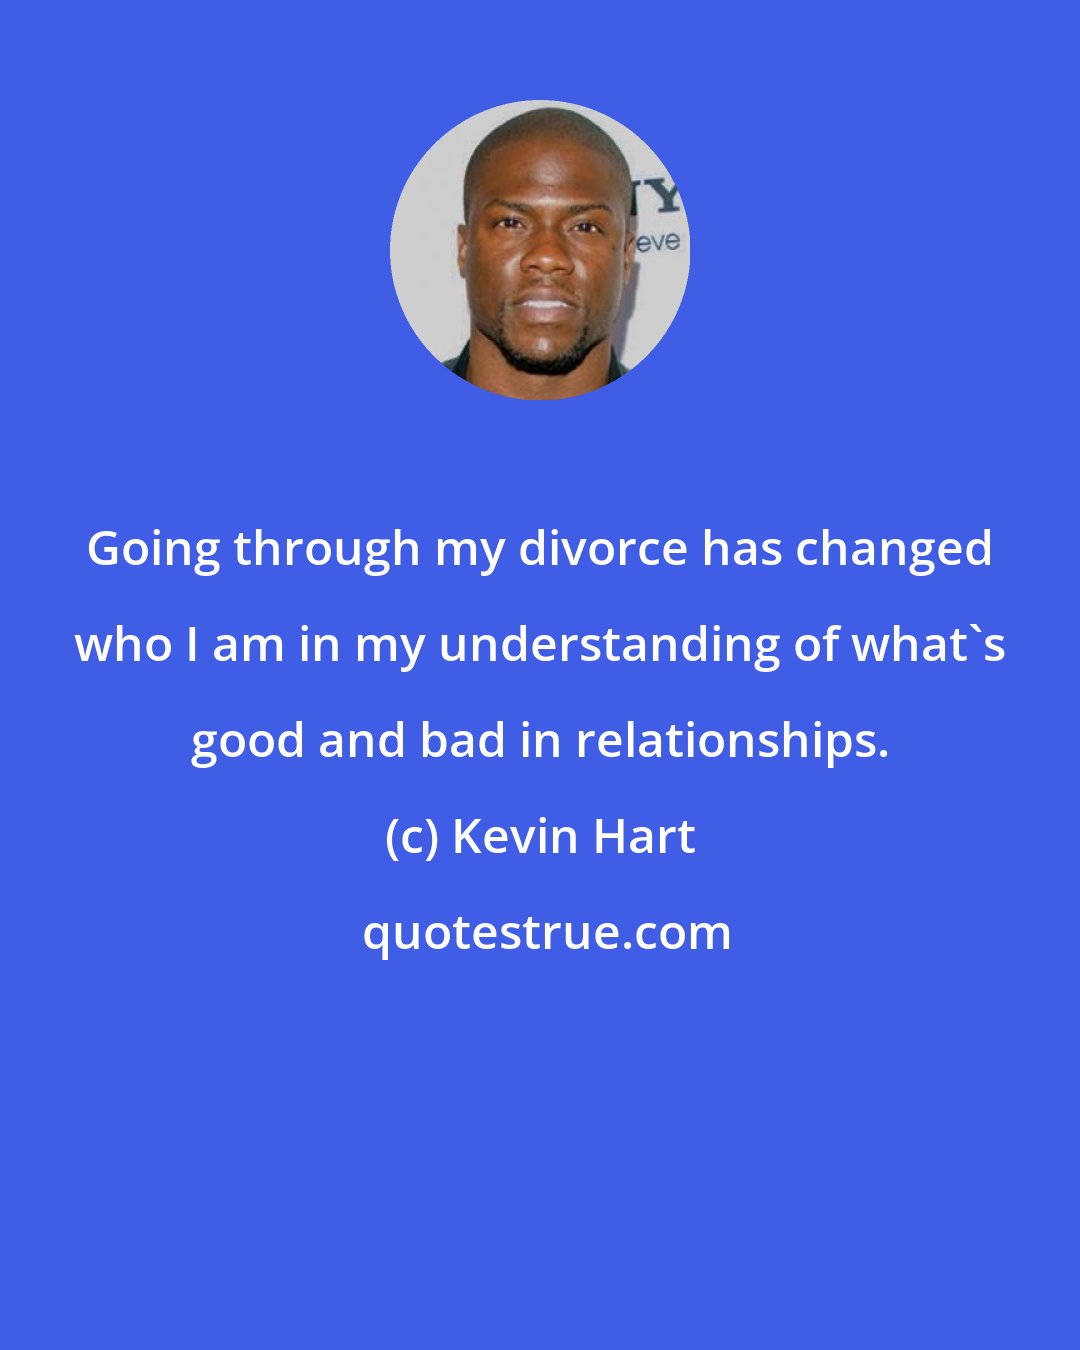 Kevin Hart: Going through my divorce has changed who I am in my understanding of what's good and bad in relationships.